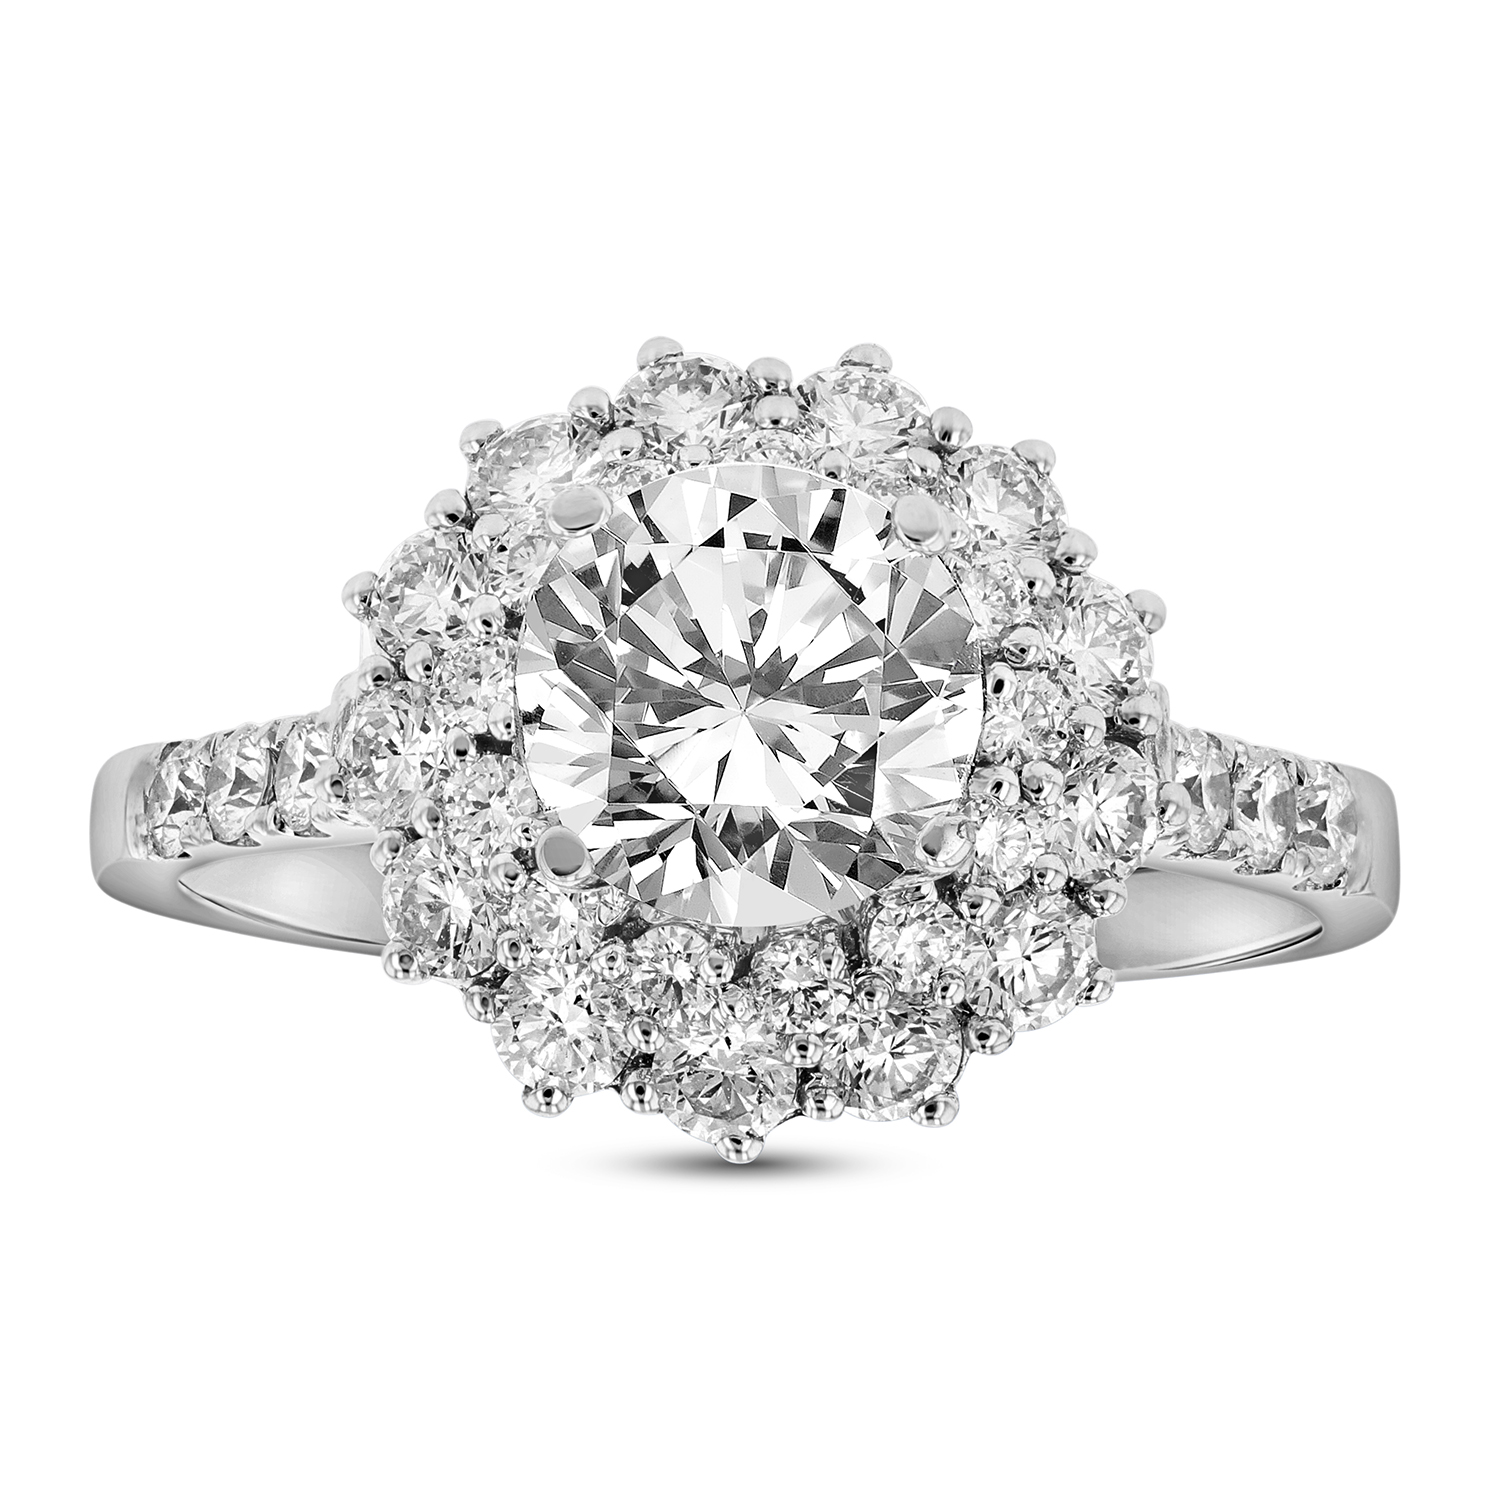 View 1.60ctw Diamond Engagement Ring in 18k white Gold